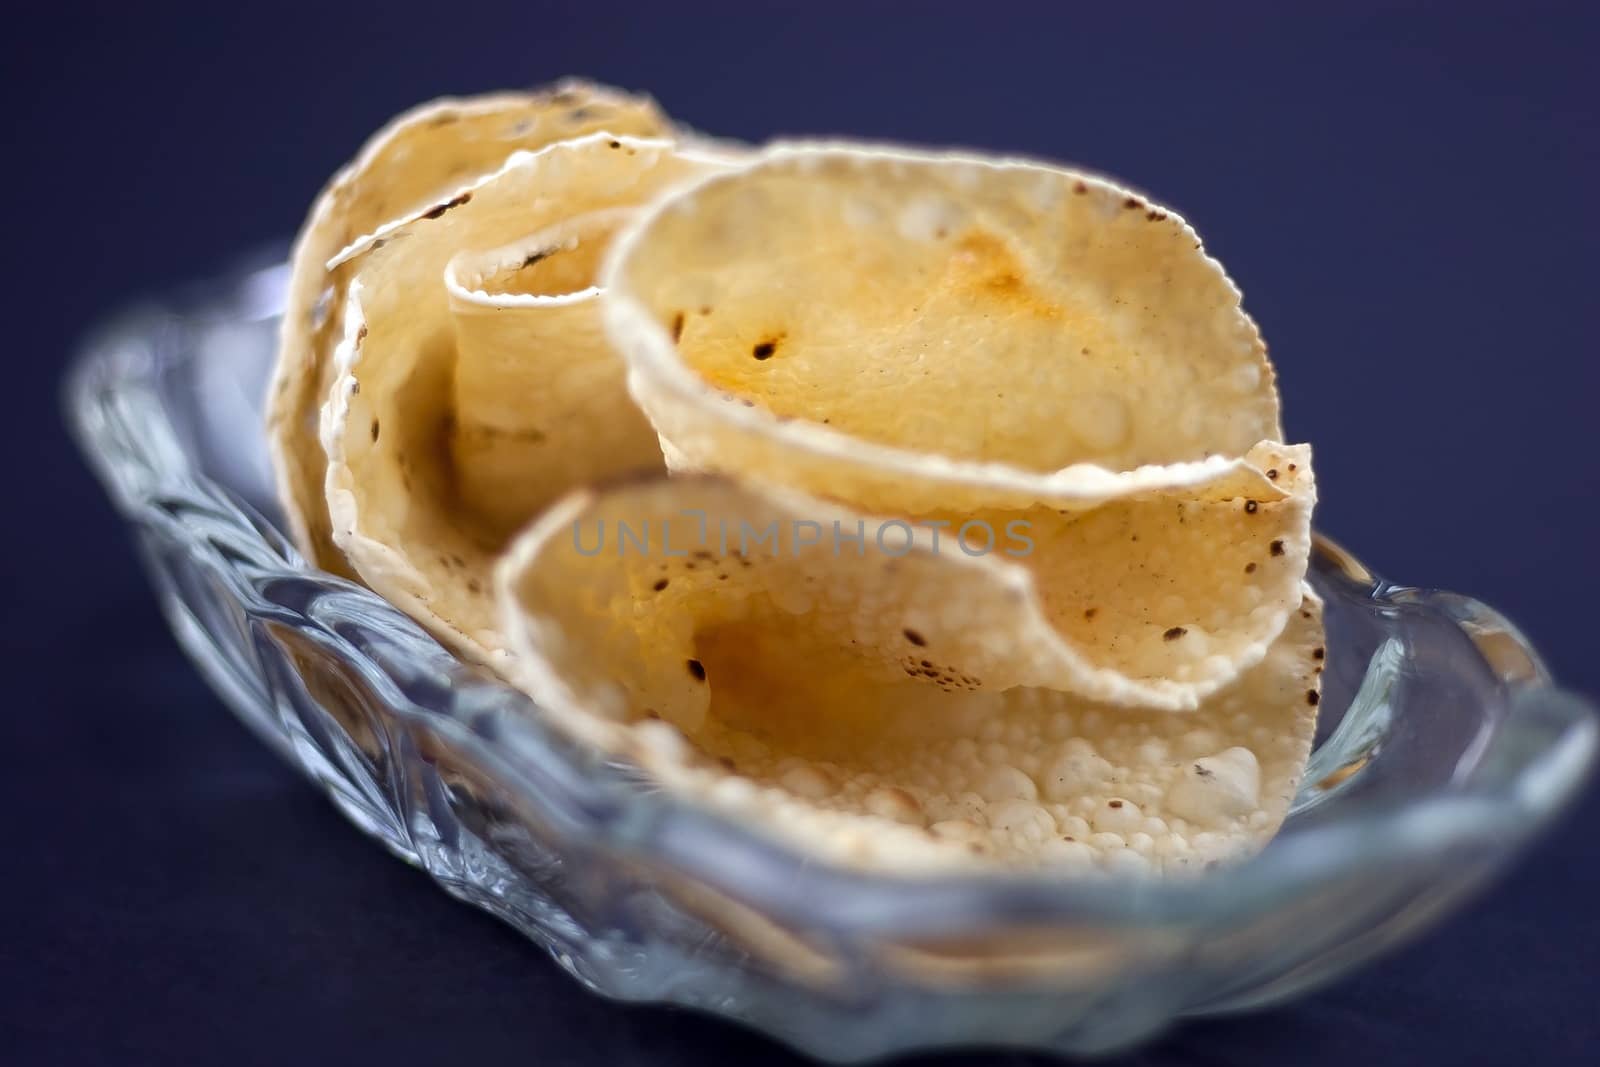 Delicious Indian Indian Papadum crisps in a glass bowl